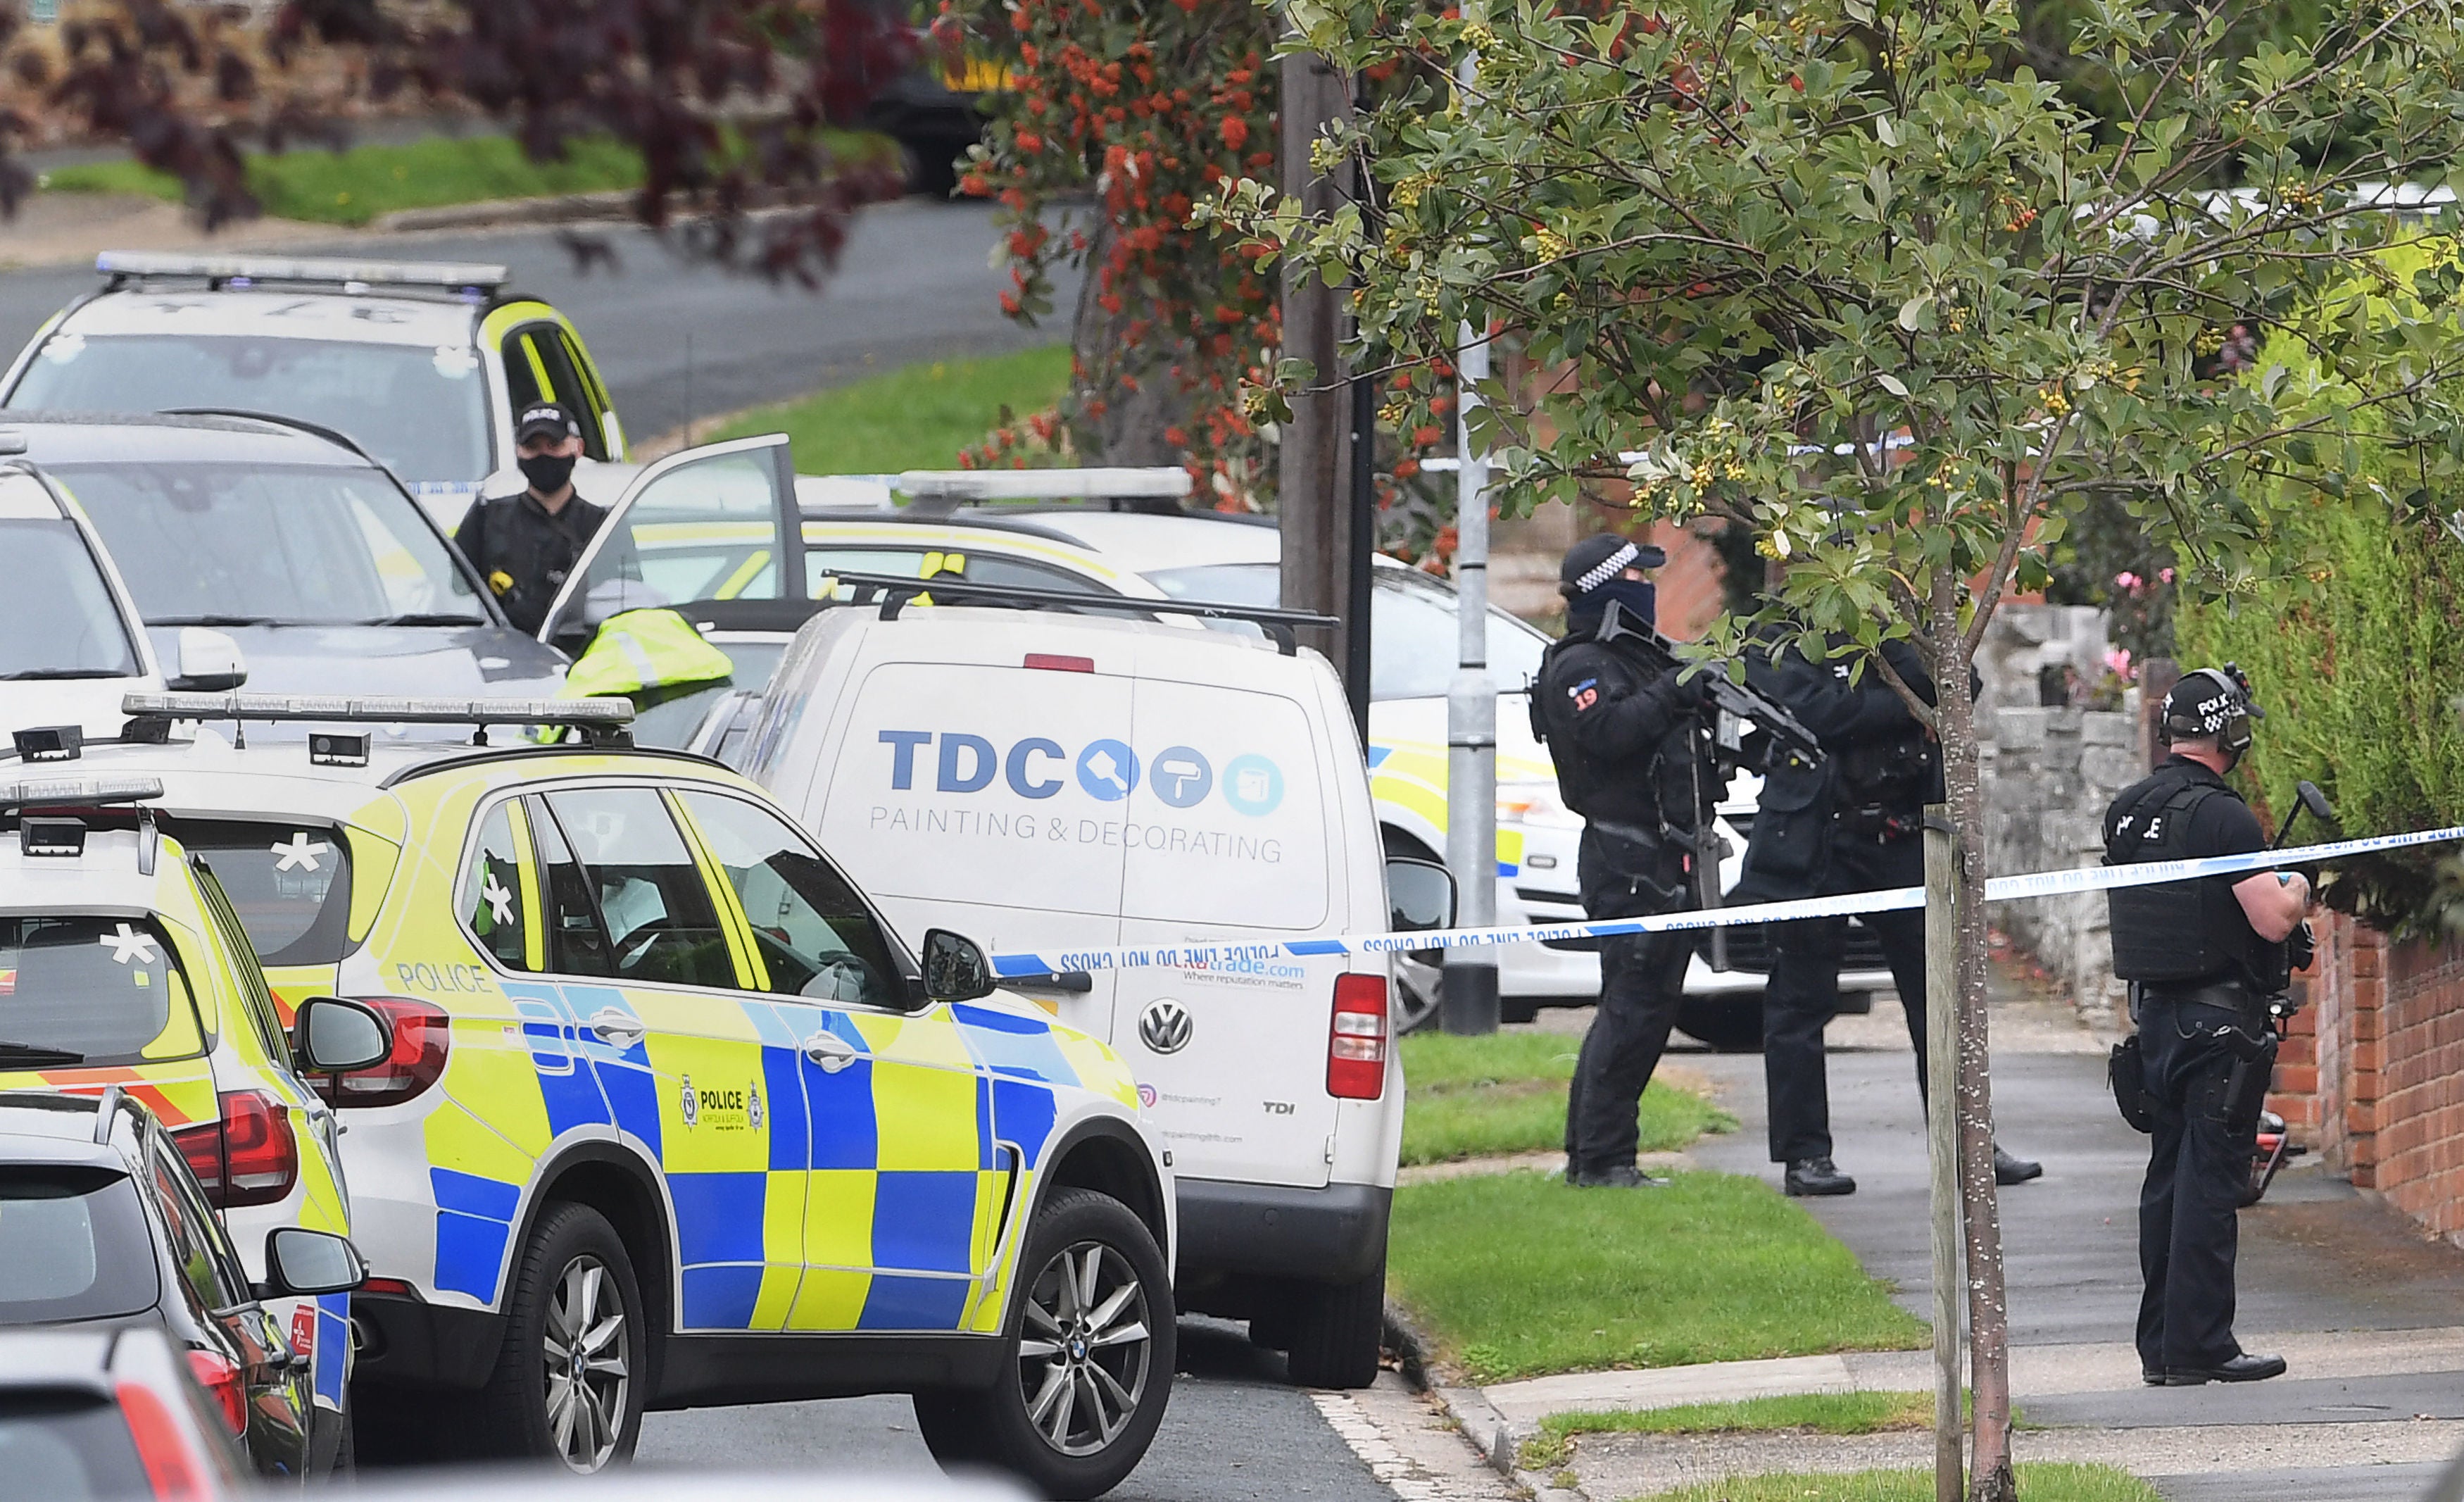 Armed police arrested a boy in Westwood Avenue, Ipswich, two hours after the attack